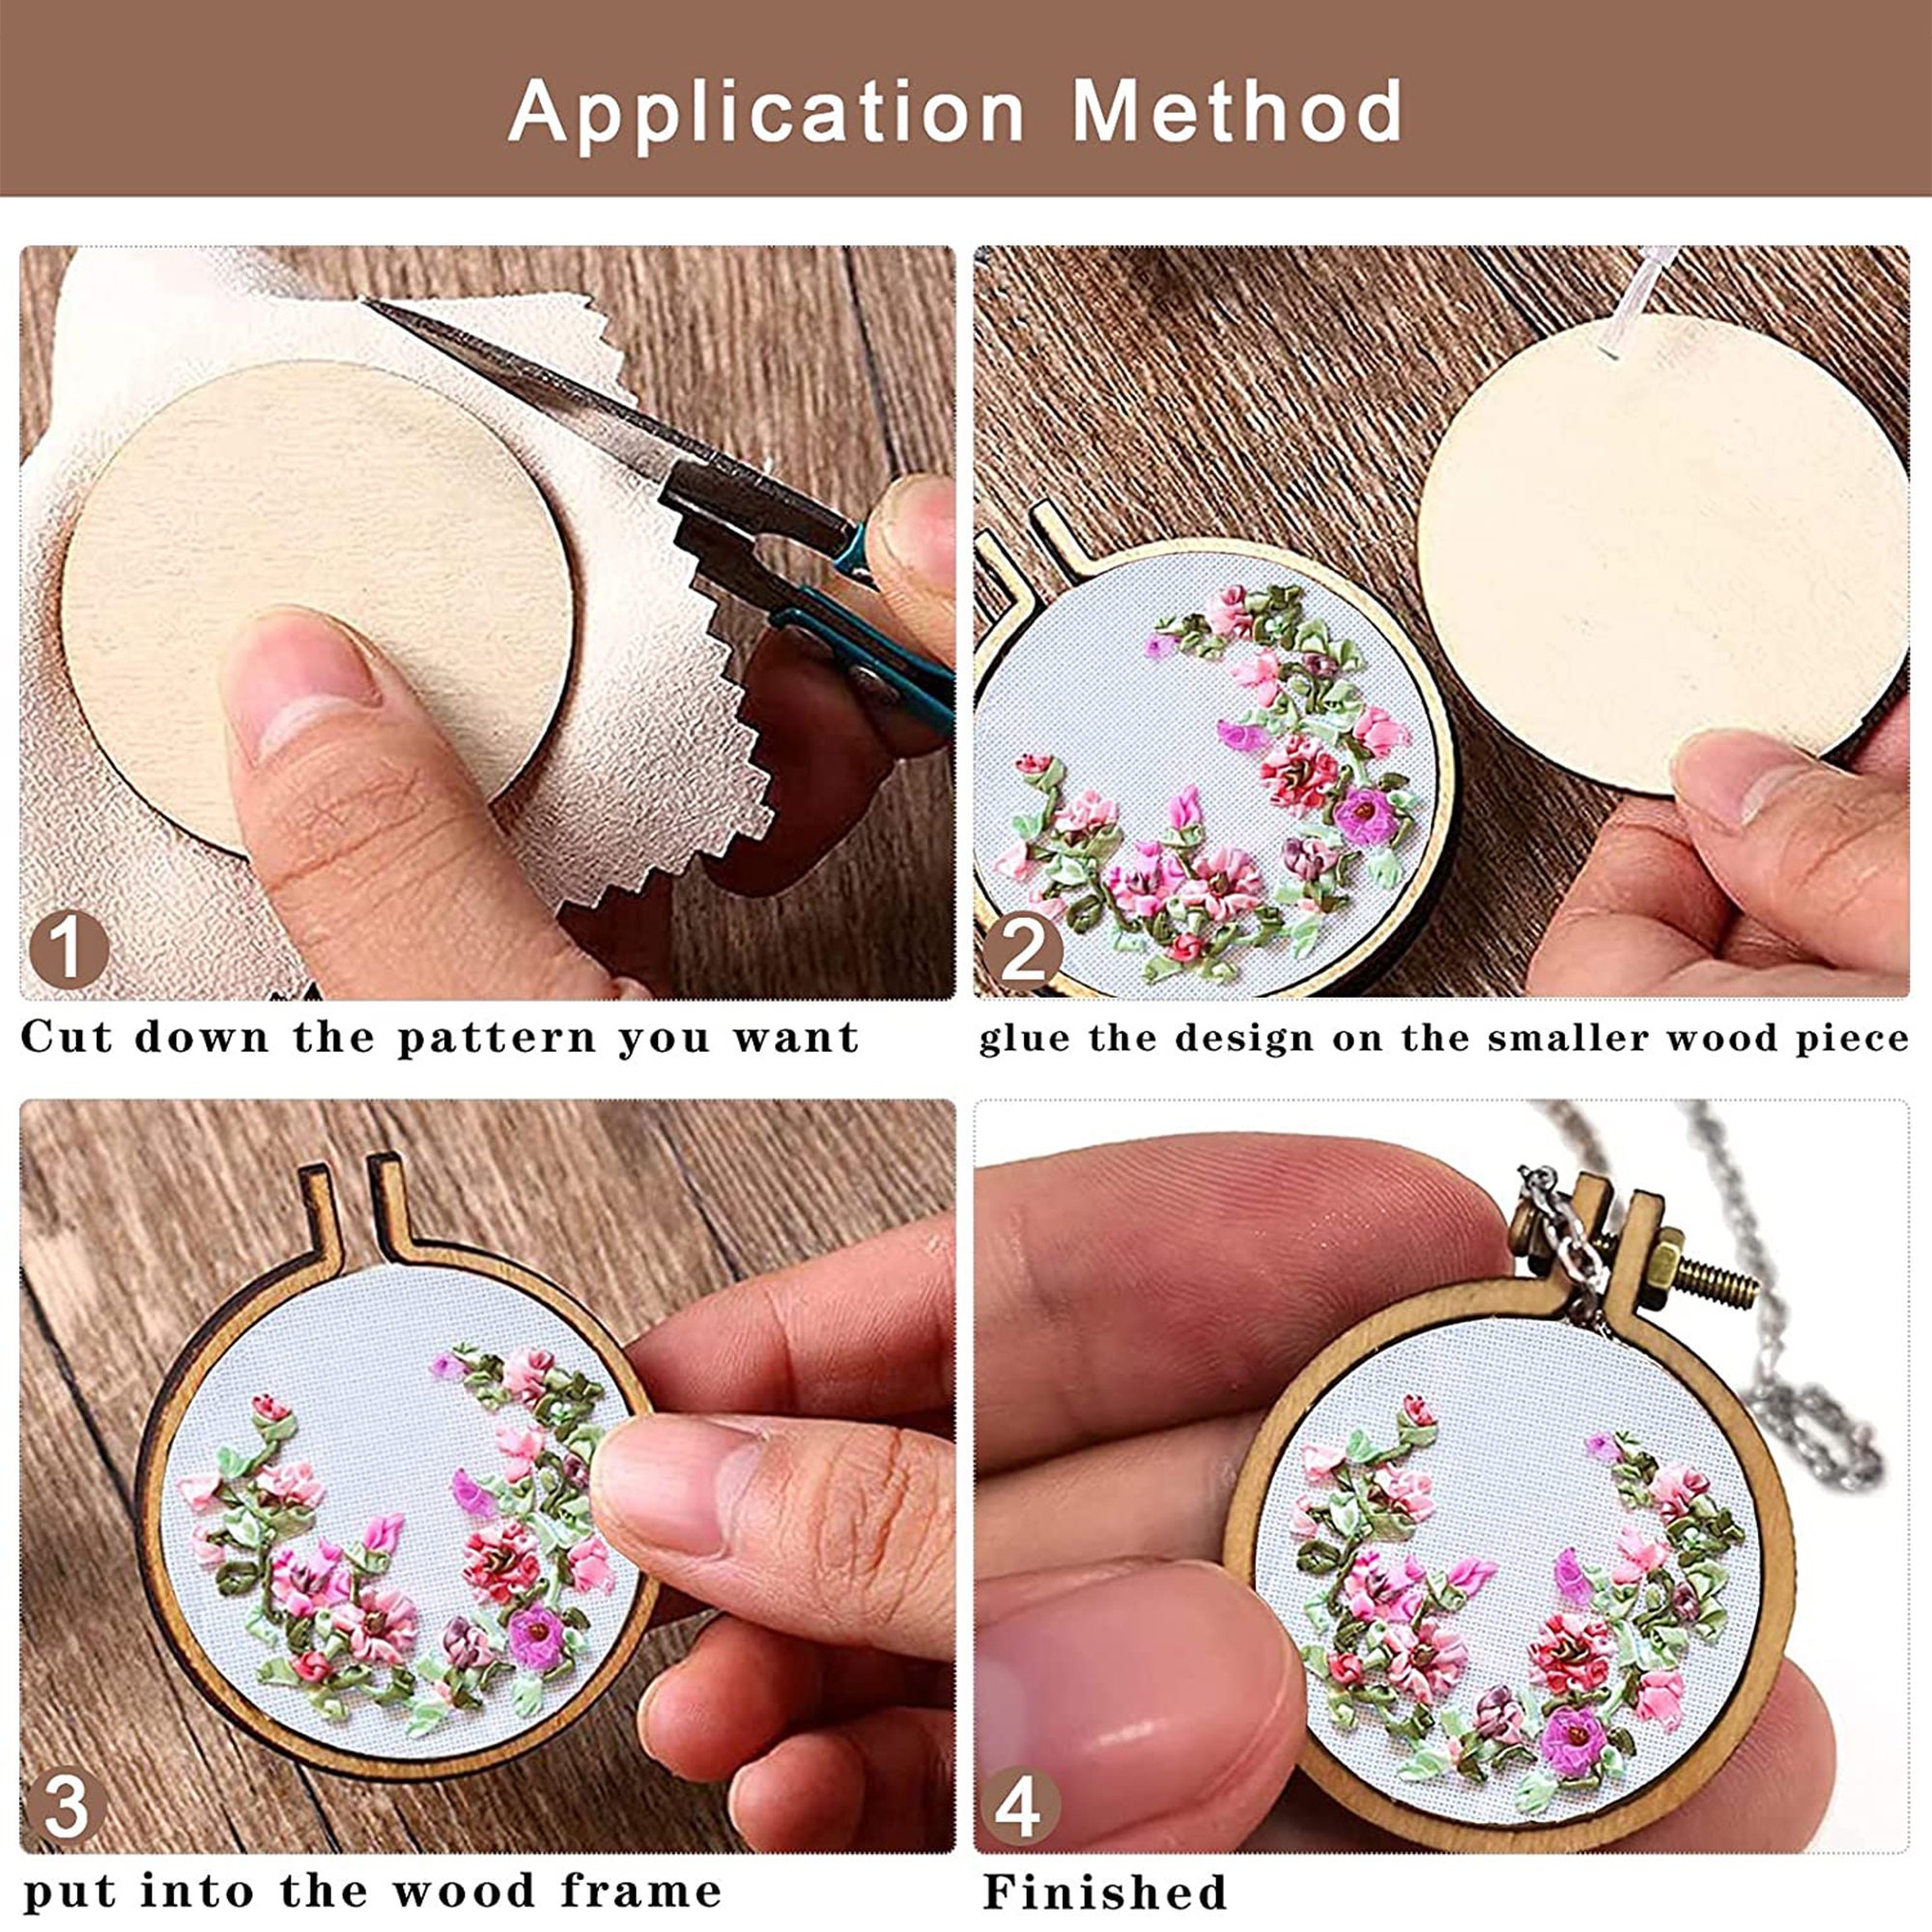 EmbroideryMaterial.com Mini Embroidery Hoop Tiny Wooden Round Circle Frame  Combo-3cm,4cm and 5 cm Embroidery Hoop Price in India - Buy  EmbroideryMaterial.com Mini Embroidery Hoop Tiny Wooden Round Circle Frame  Combo-3cm,4cm and 5